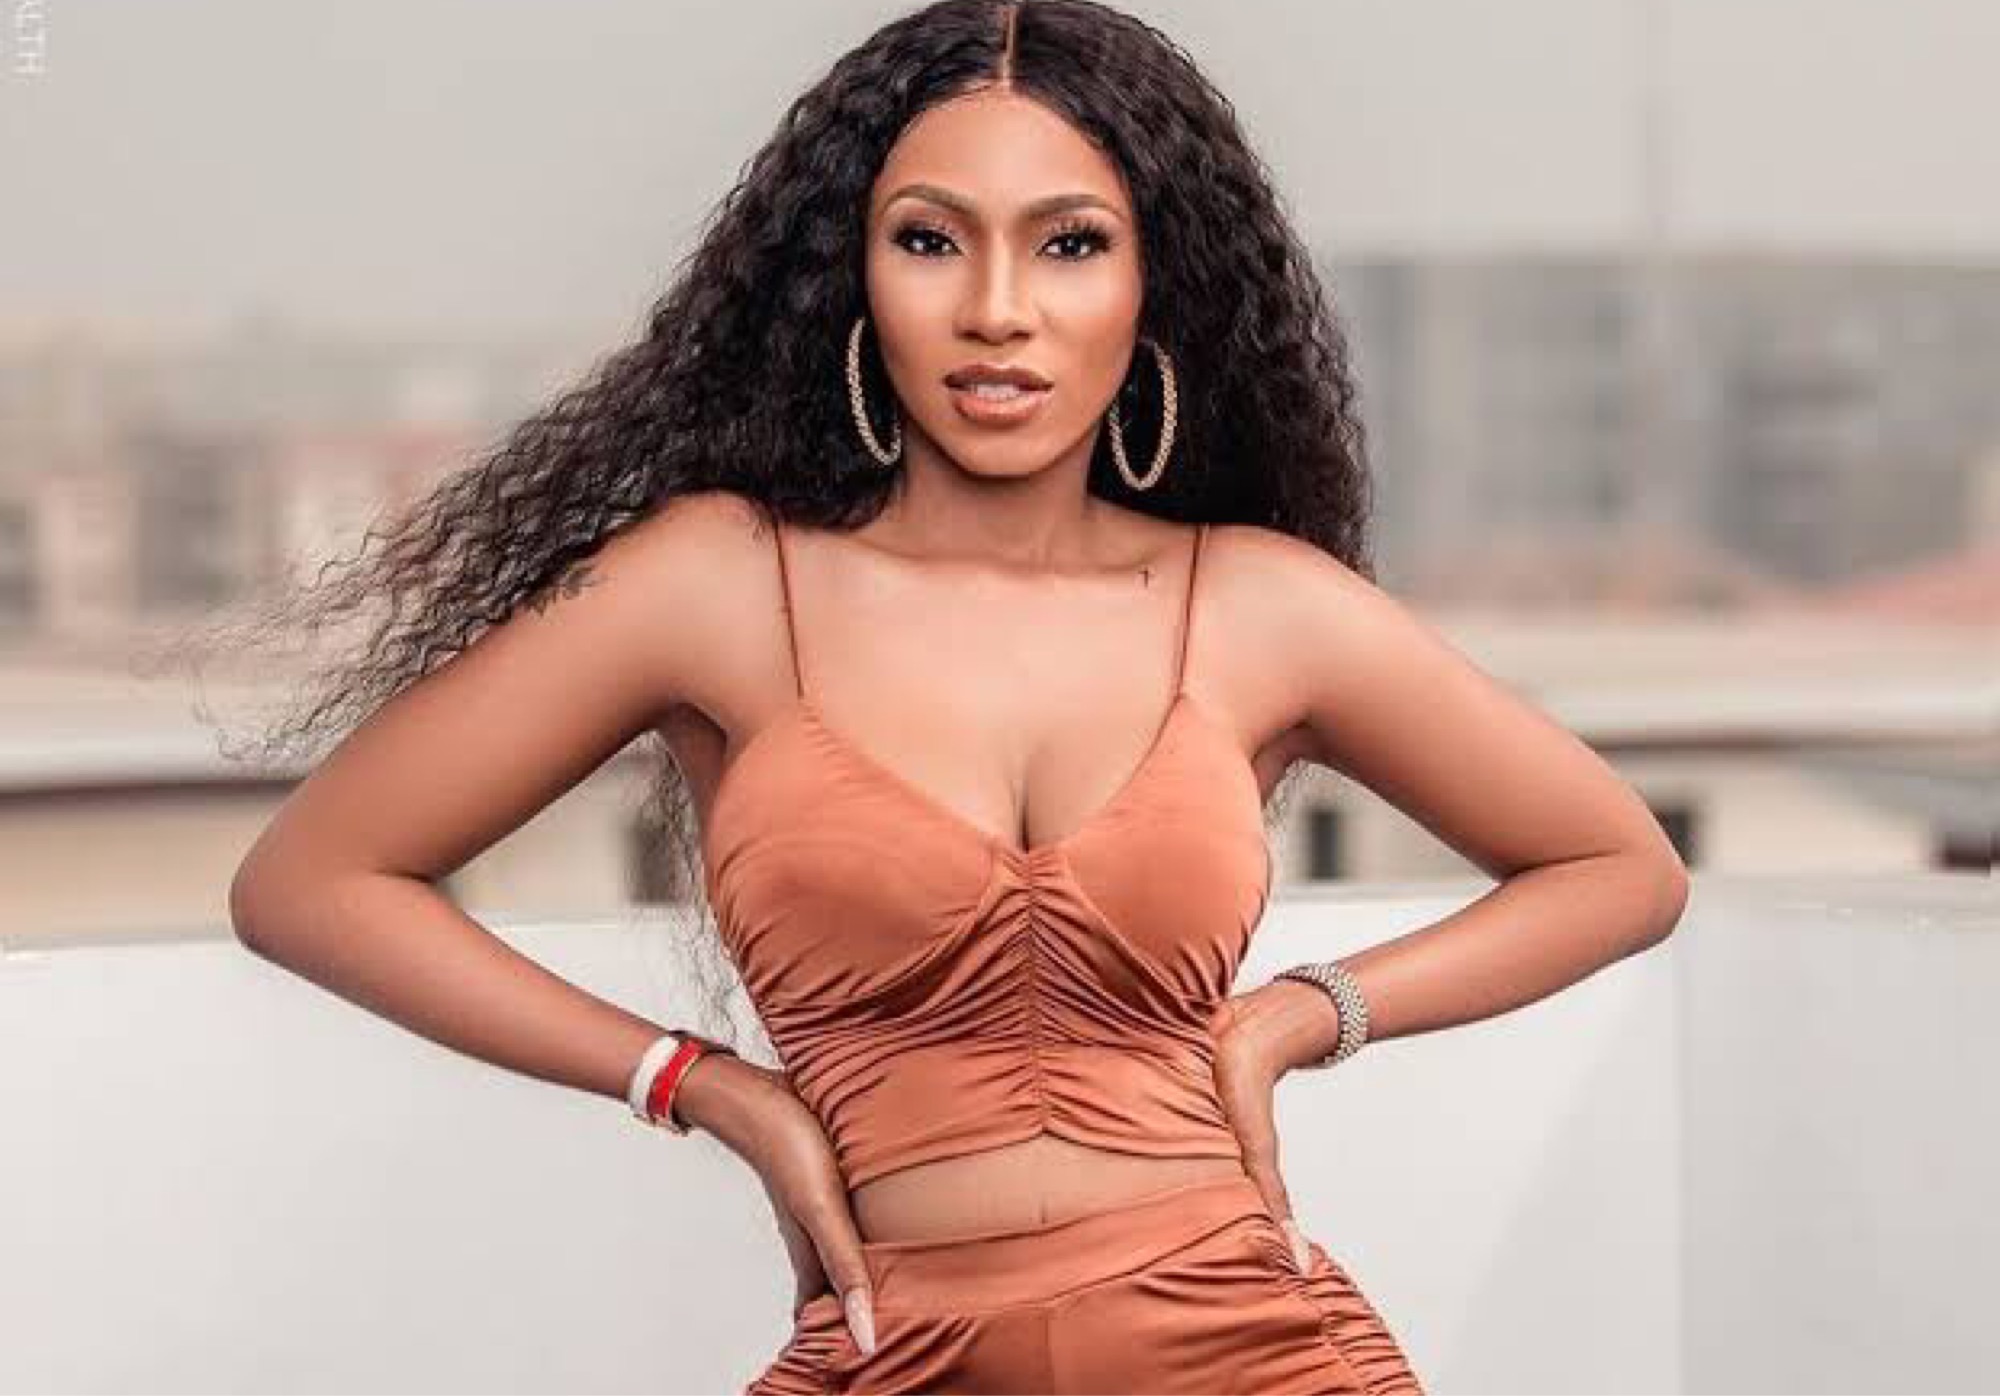 EndSARS: “It Will Be A Big Shame If You Sell Your Conscience” - Mercy Eke